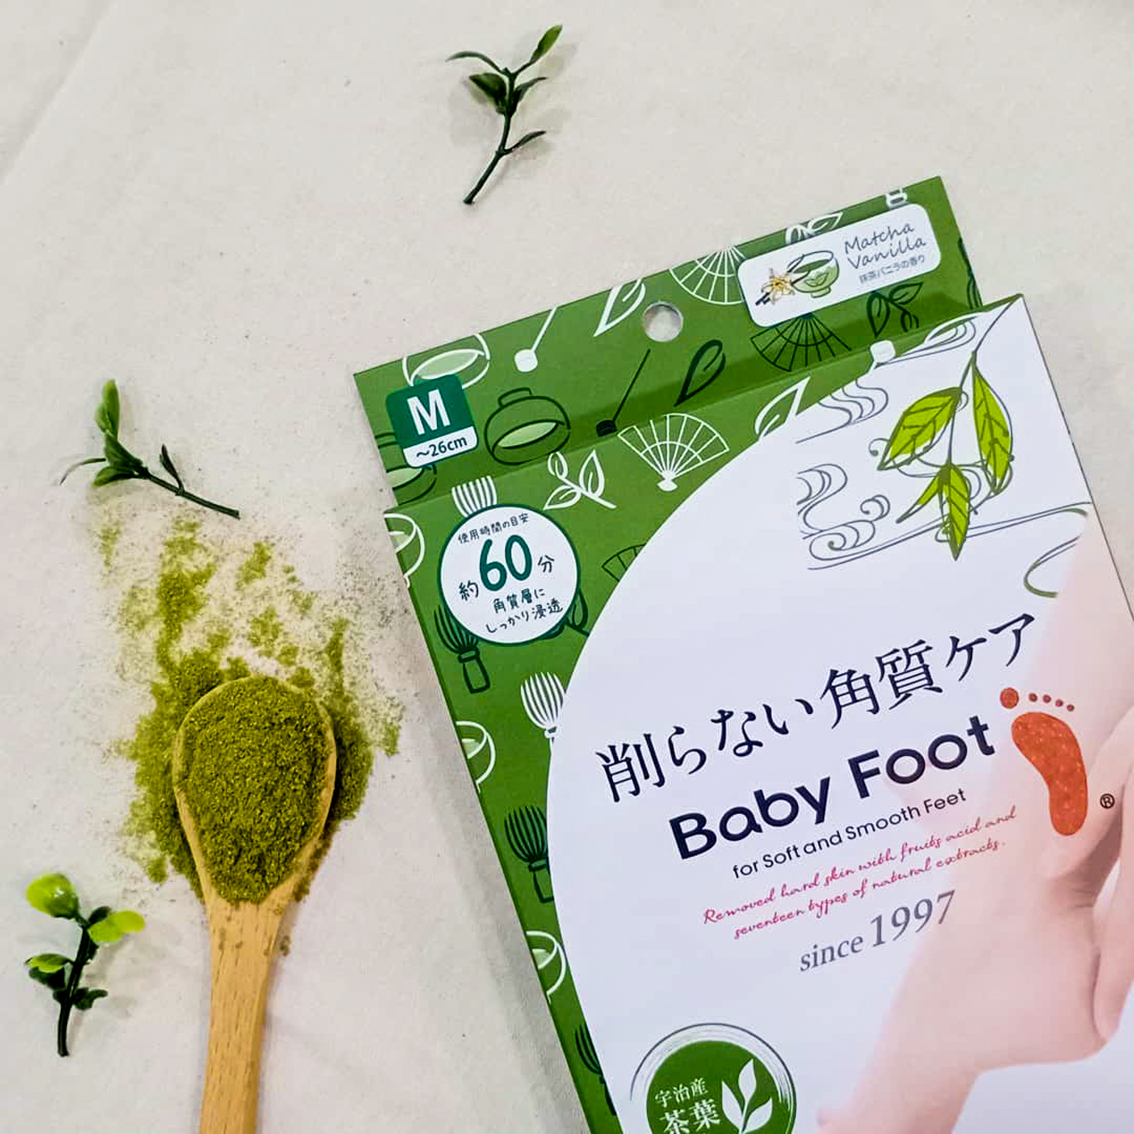 Baby Foot Babyfoot Peeling Foot Skin Mask -Matcha Limited Edition - Size M for female user - Original from Japan (READY STOCK)